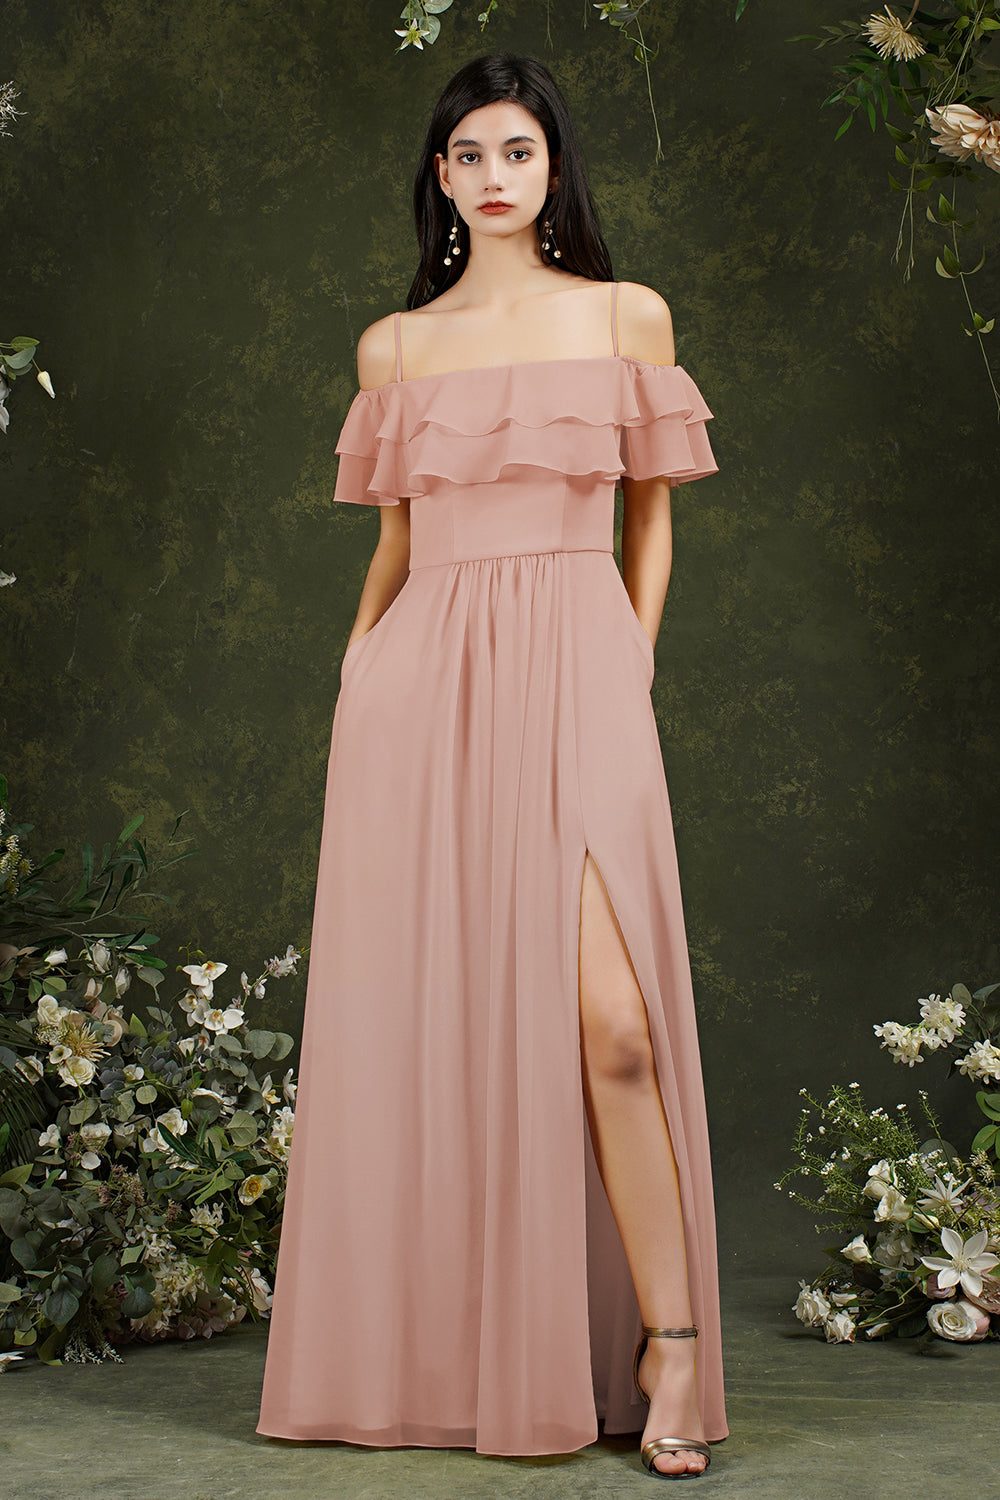 Vintage Long A-line Backless Front Split Chiffon Bridesmaid Dress With Pockets-BIZTUNNEL